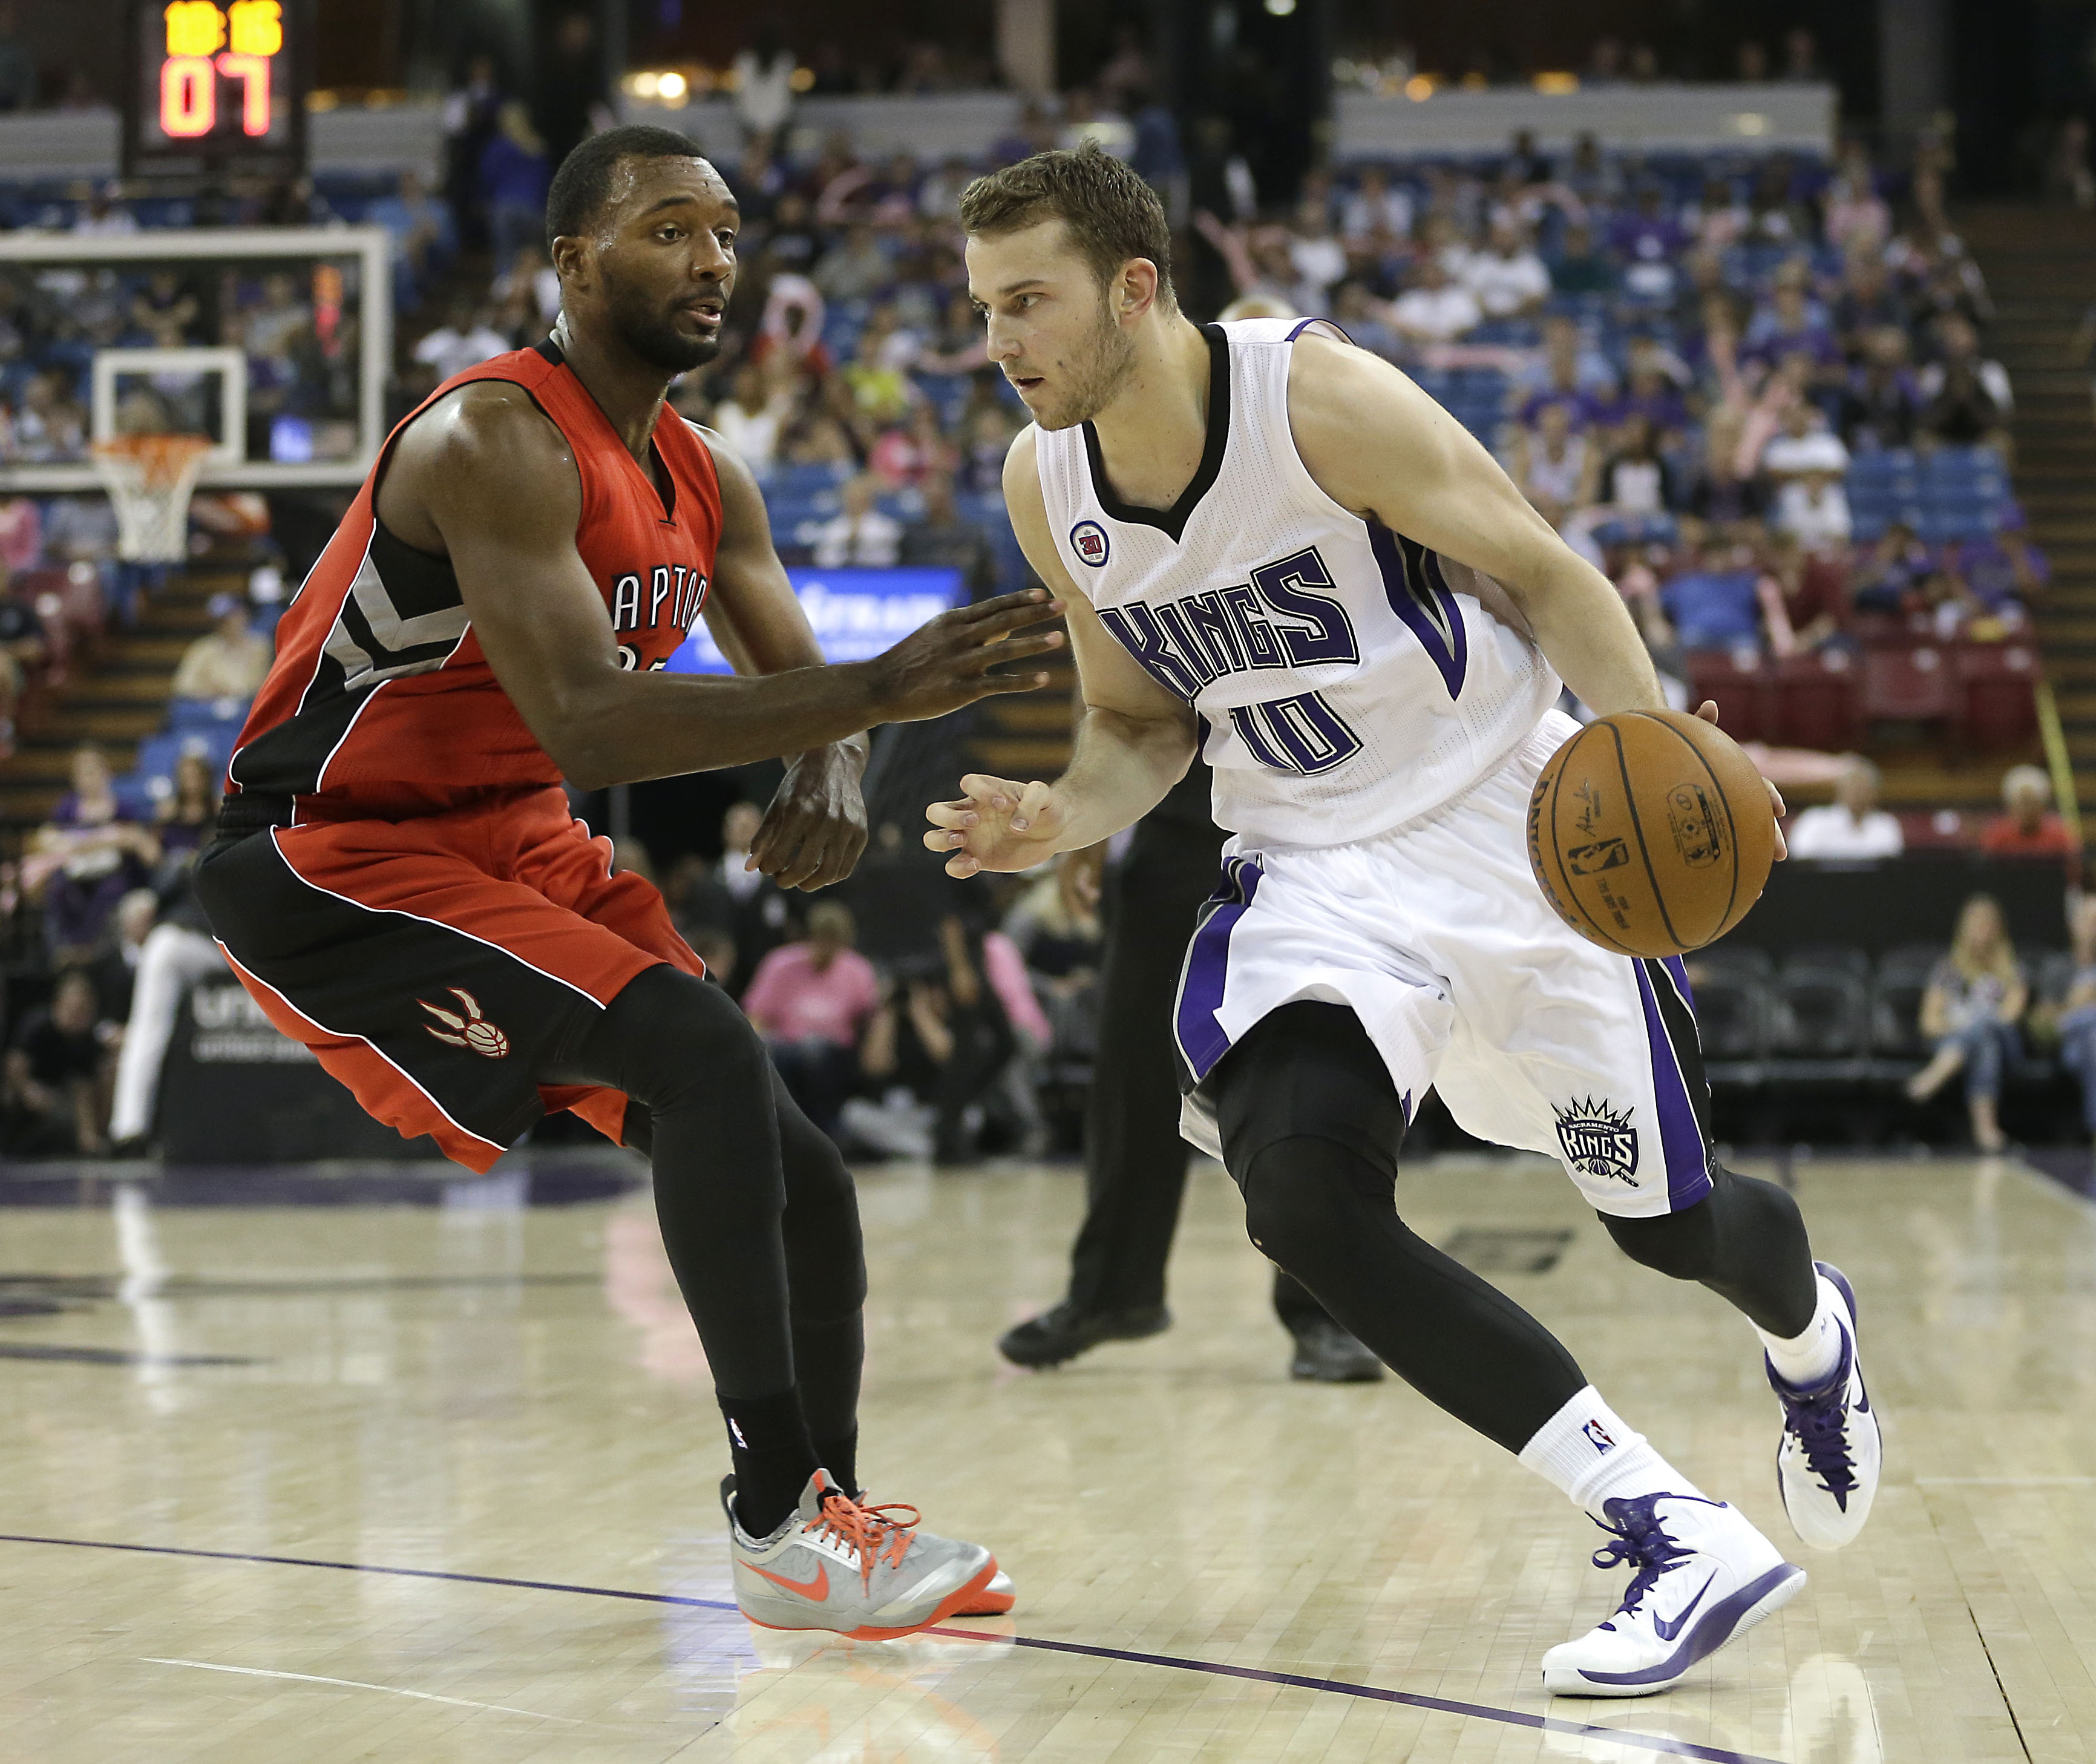 Sharpshooter Nik Stauskas could see big minutes as a rookie. (AP/Rich Pedroncelli)